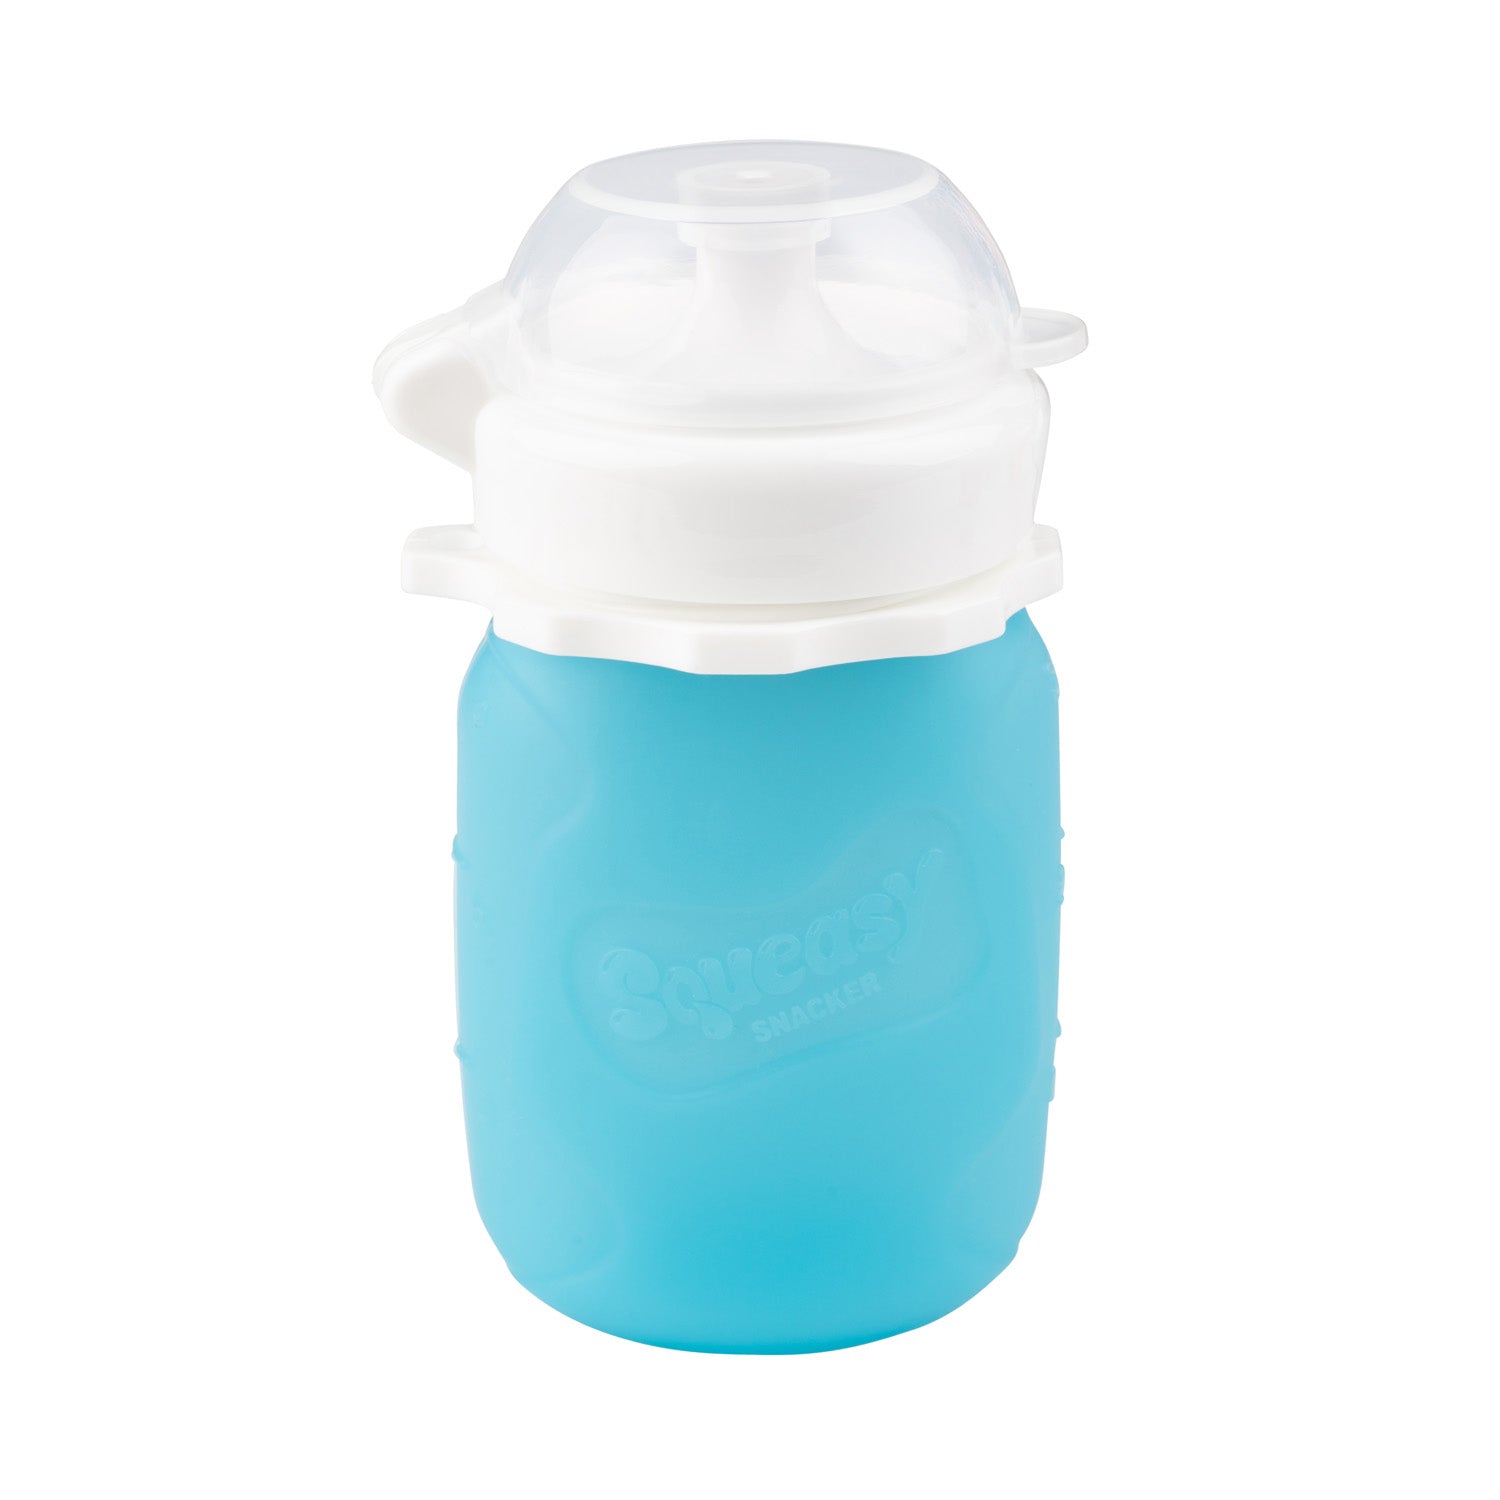 Blue Squeasy Silicone Pouch